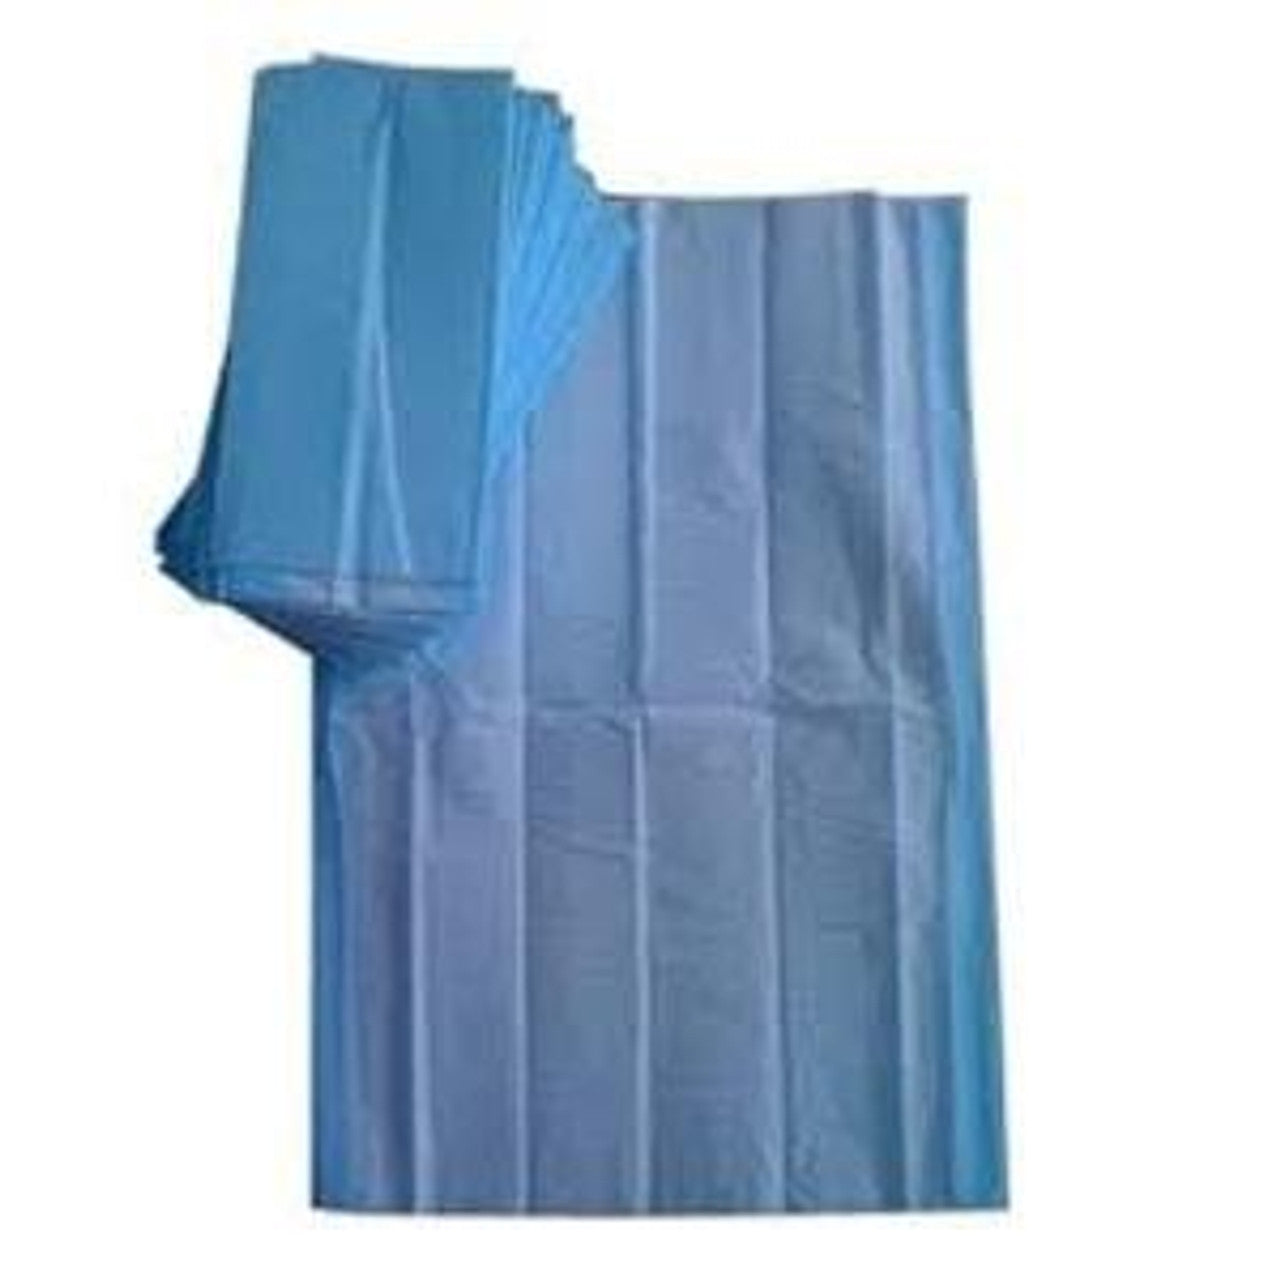 Cello Economy Underpads 40 x 60cm, Packet of 50 Underpads